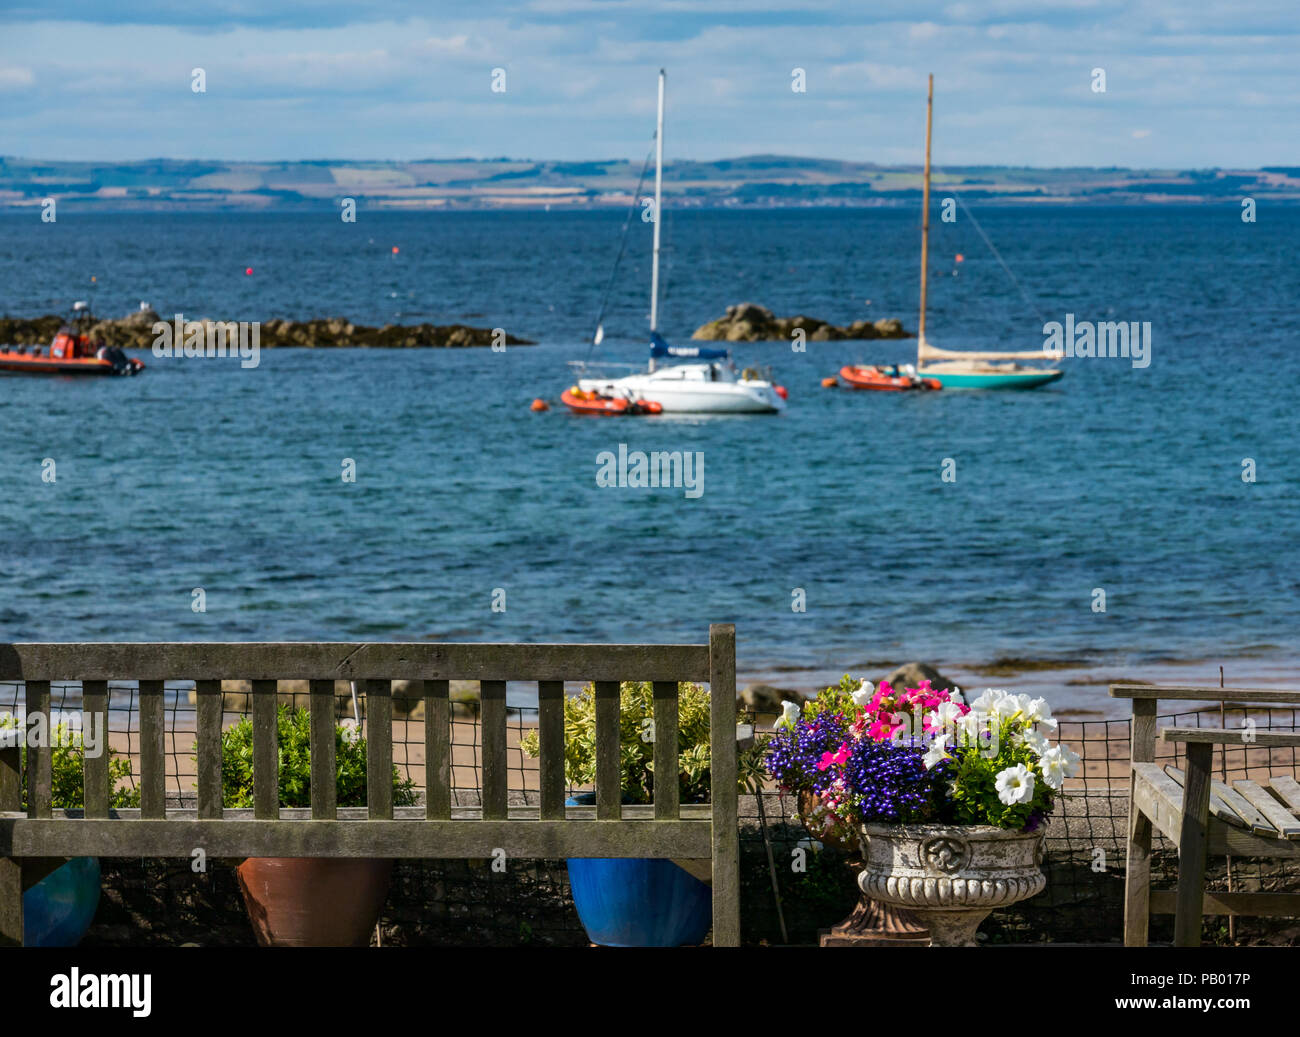 Colourful flowers and benches by seaside house, West bay beach with moored sailing boats in bay, North Berwick, East Lothian, Scotland, UK Stock Photo